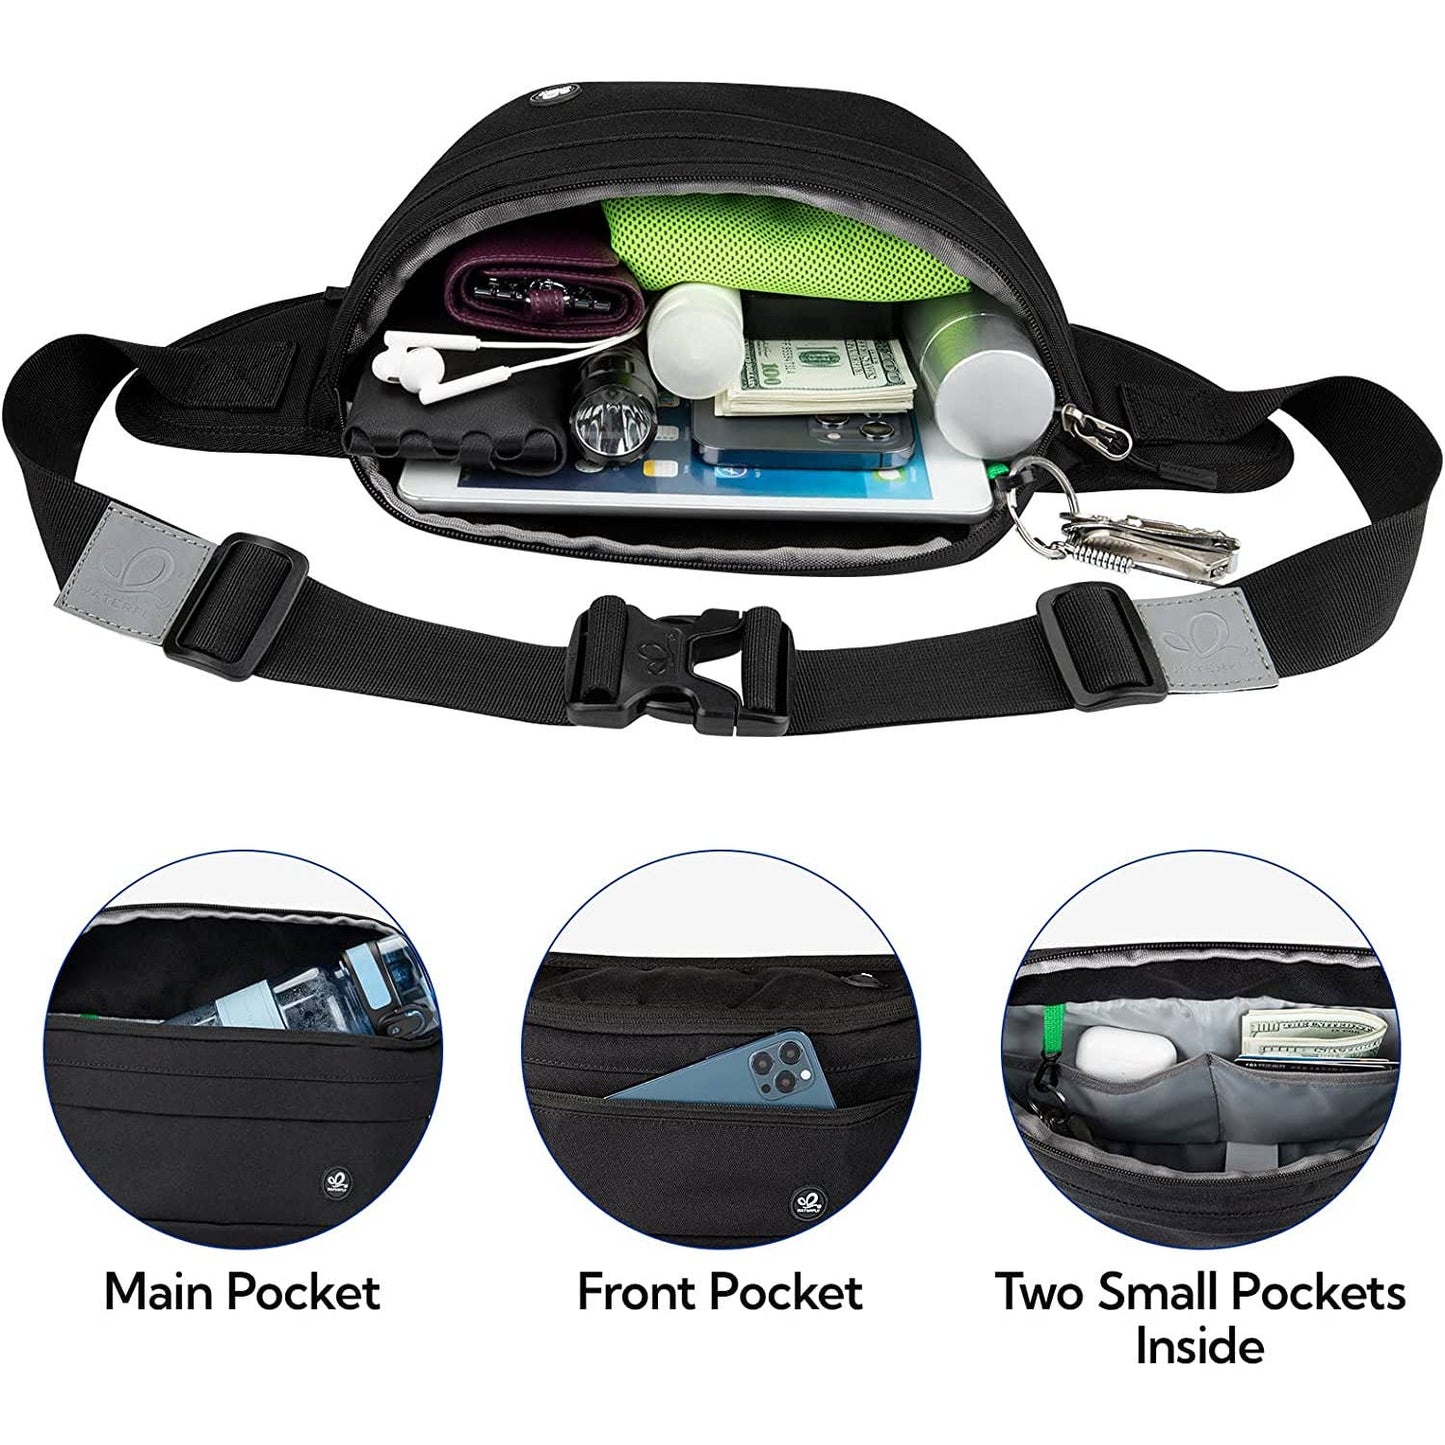 WATERFLY Fanny Pack Water Resistant Large Hiking Waist Bag